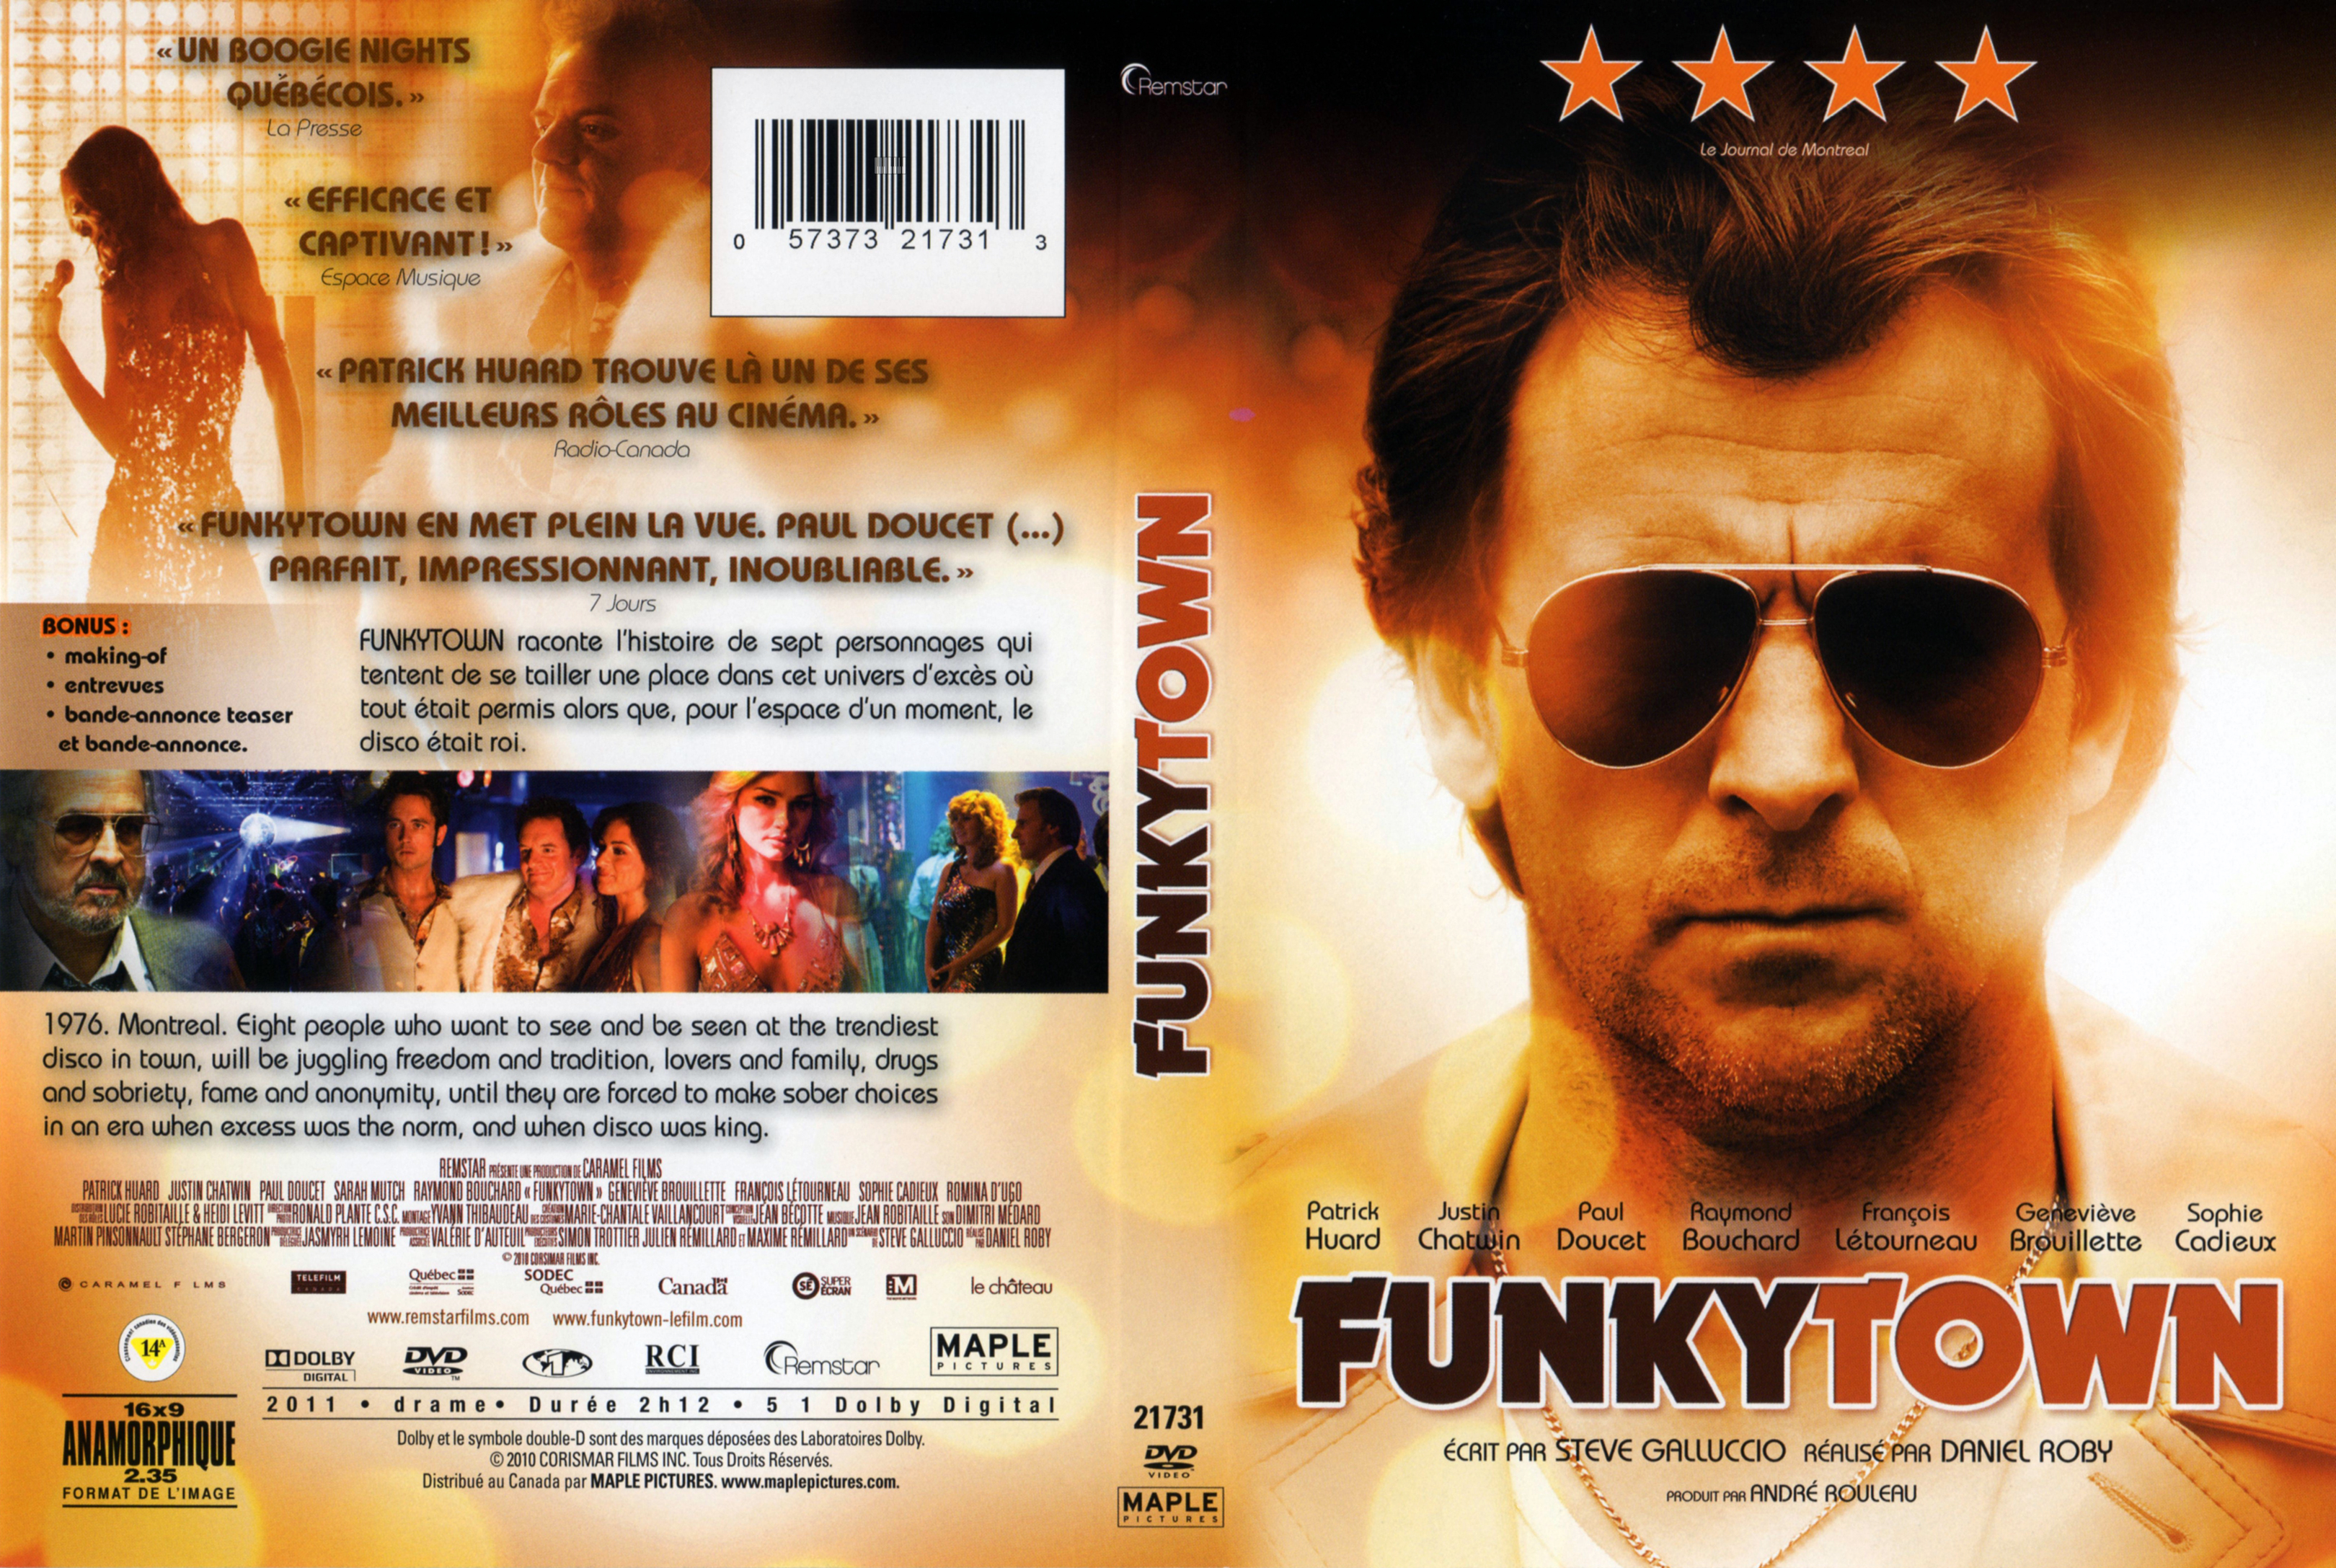 Jaquette DVD Funkytown (Canadienne)